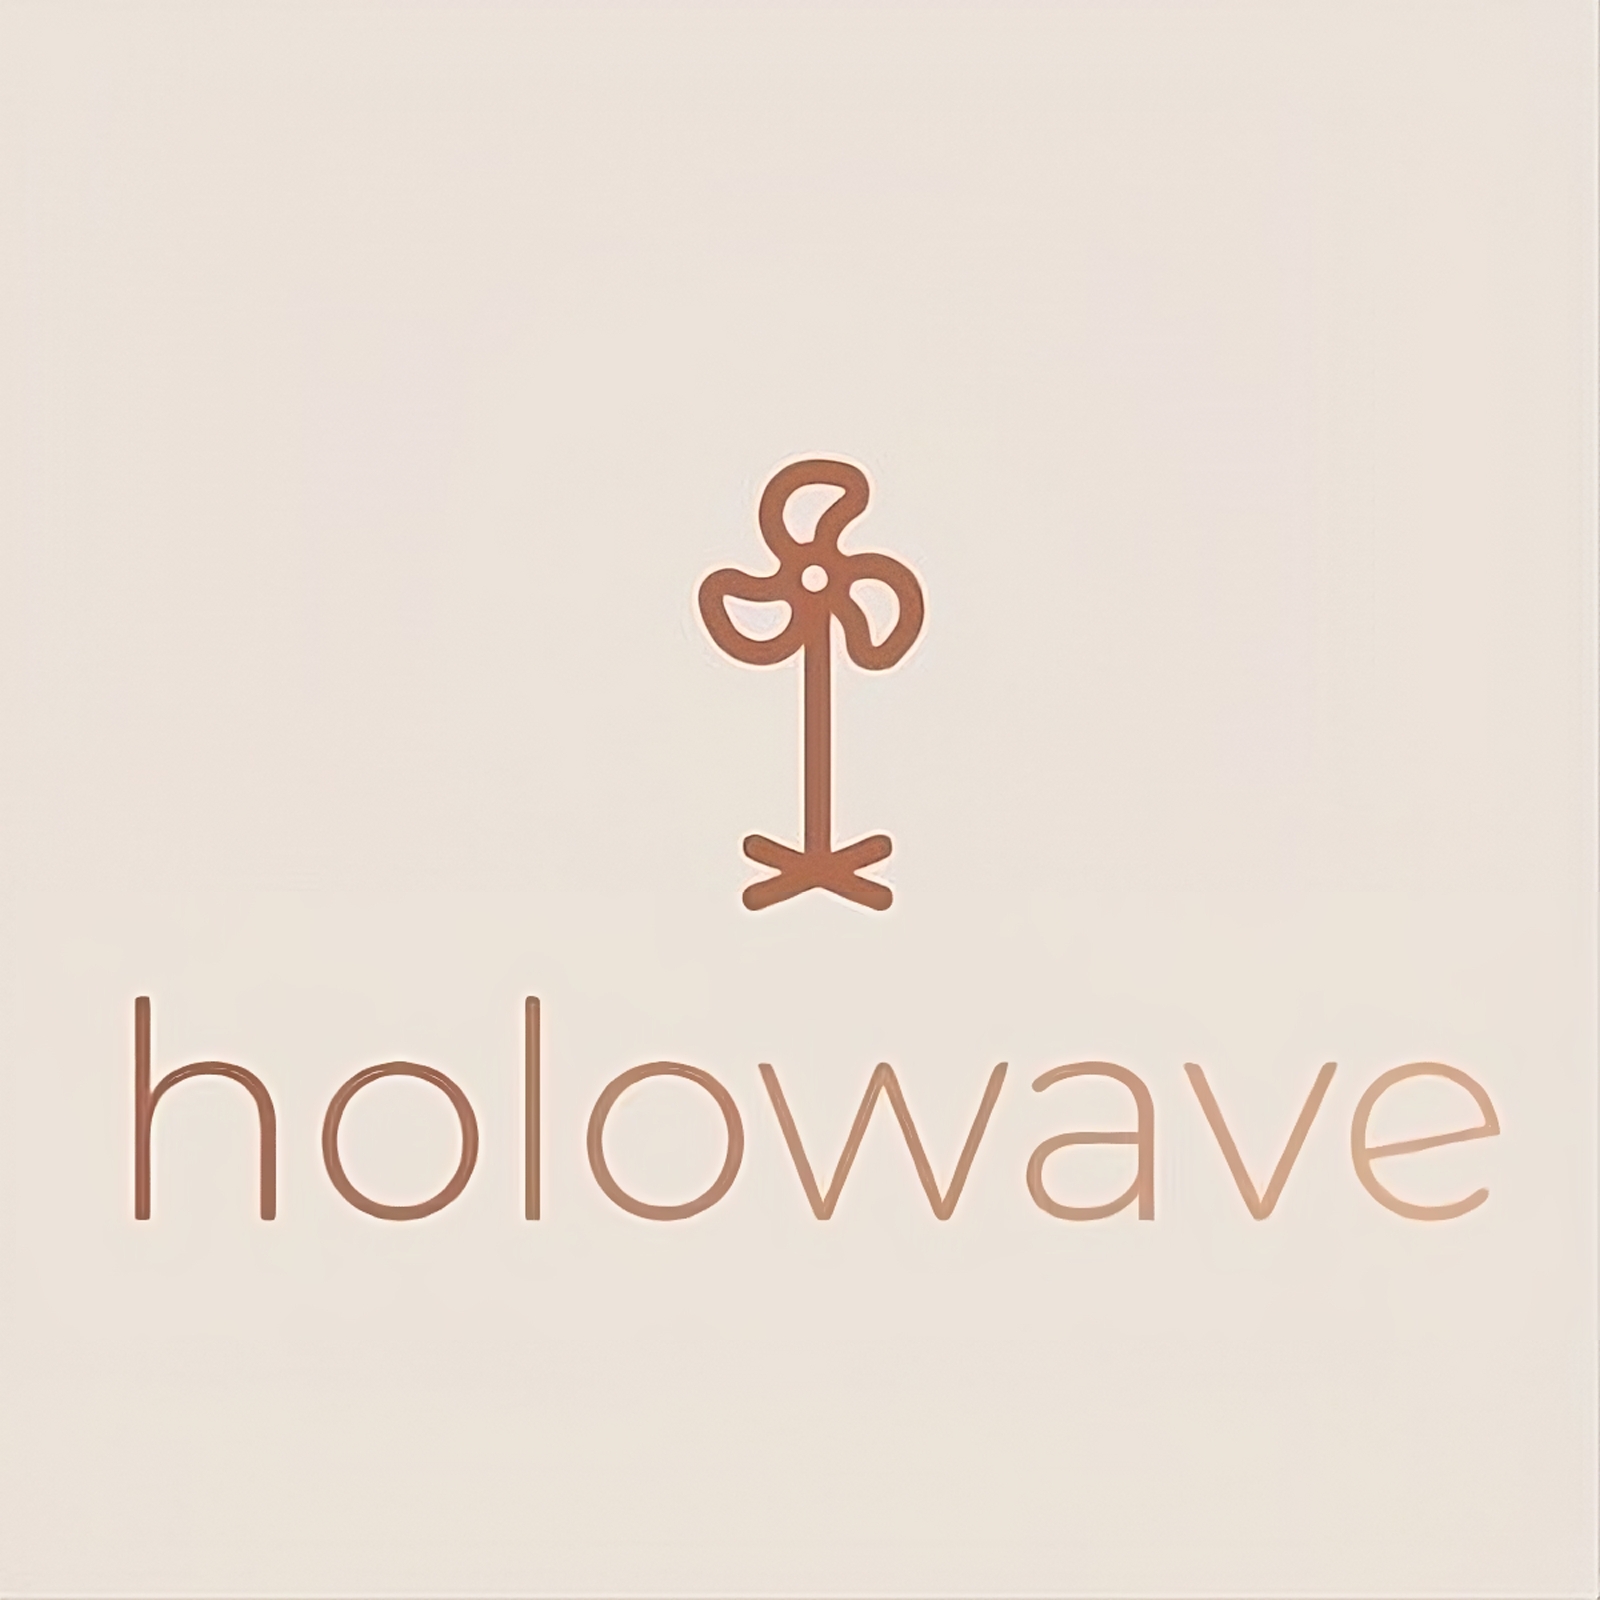 HoloWave Develops Visual Entertainment with Launch of Hologram Fan.